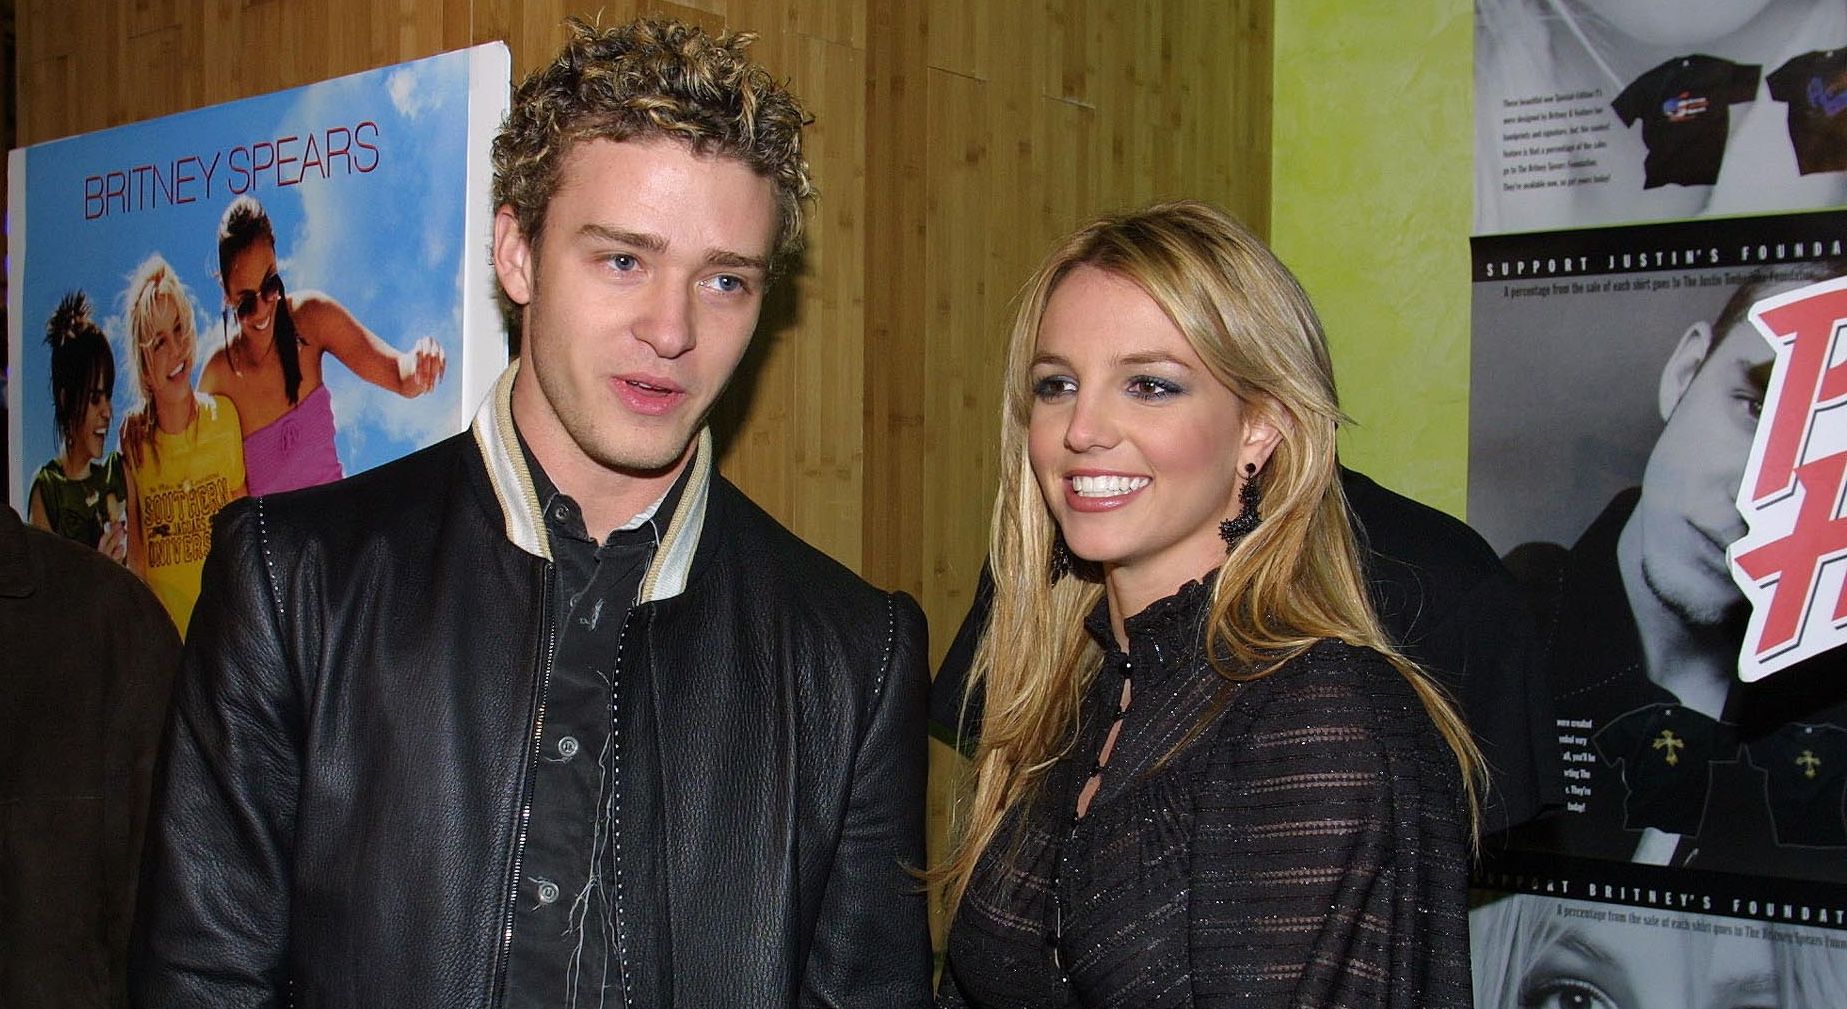 Britney Spears' forgotten song, Mona Lisa was a response to Justin Timberlake's Cry Me a River?